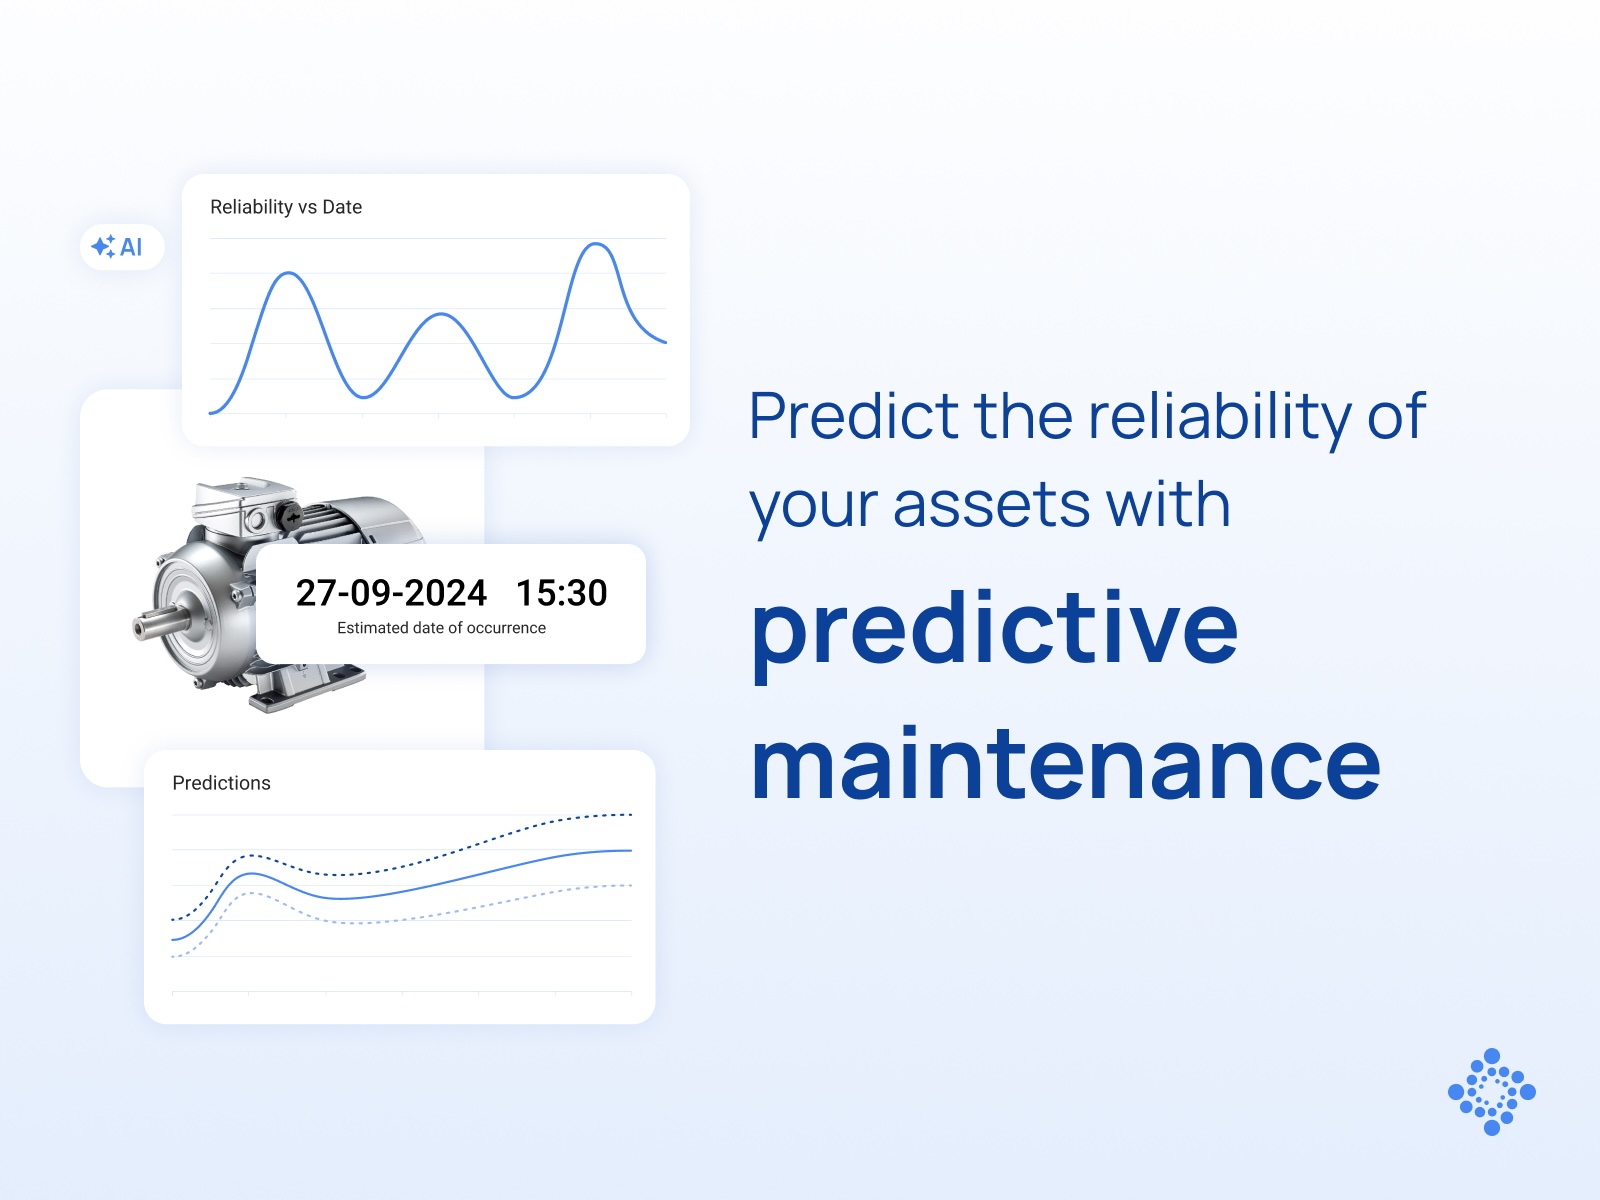 Predict the reliability of your assets with predictive maintenance.